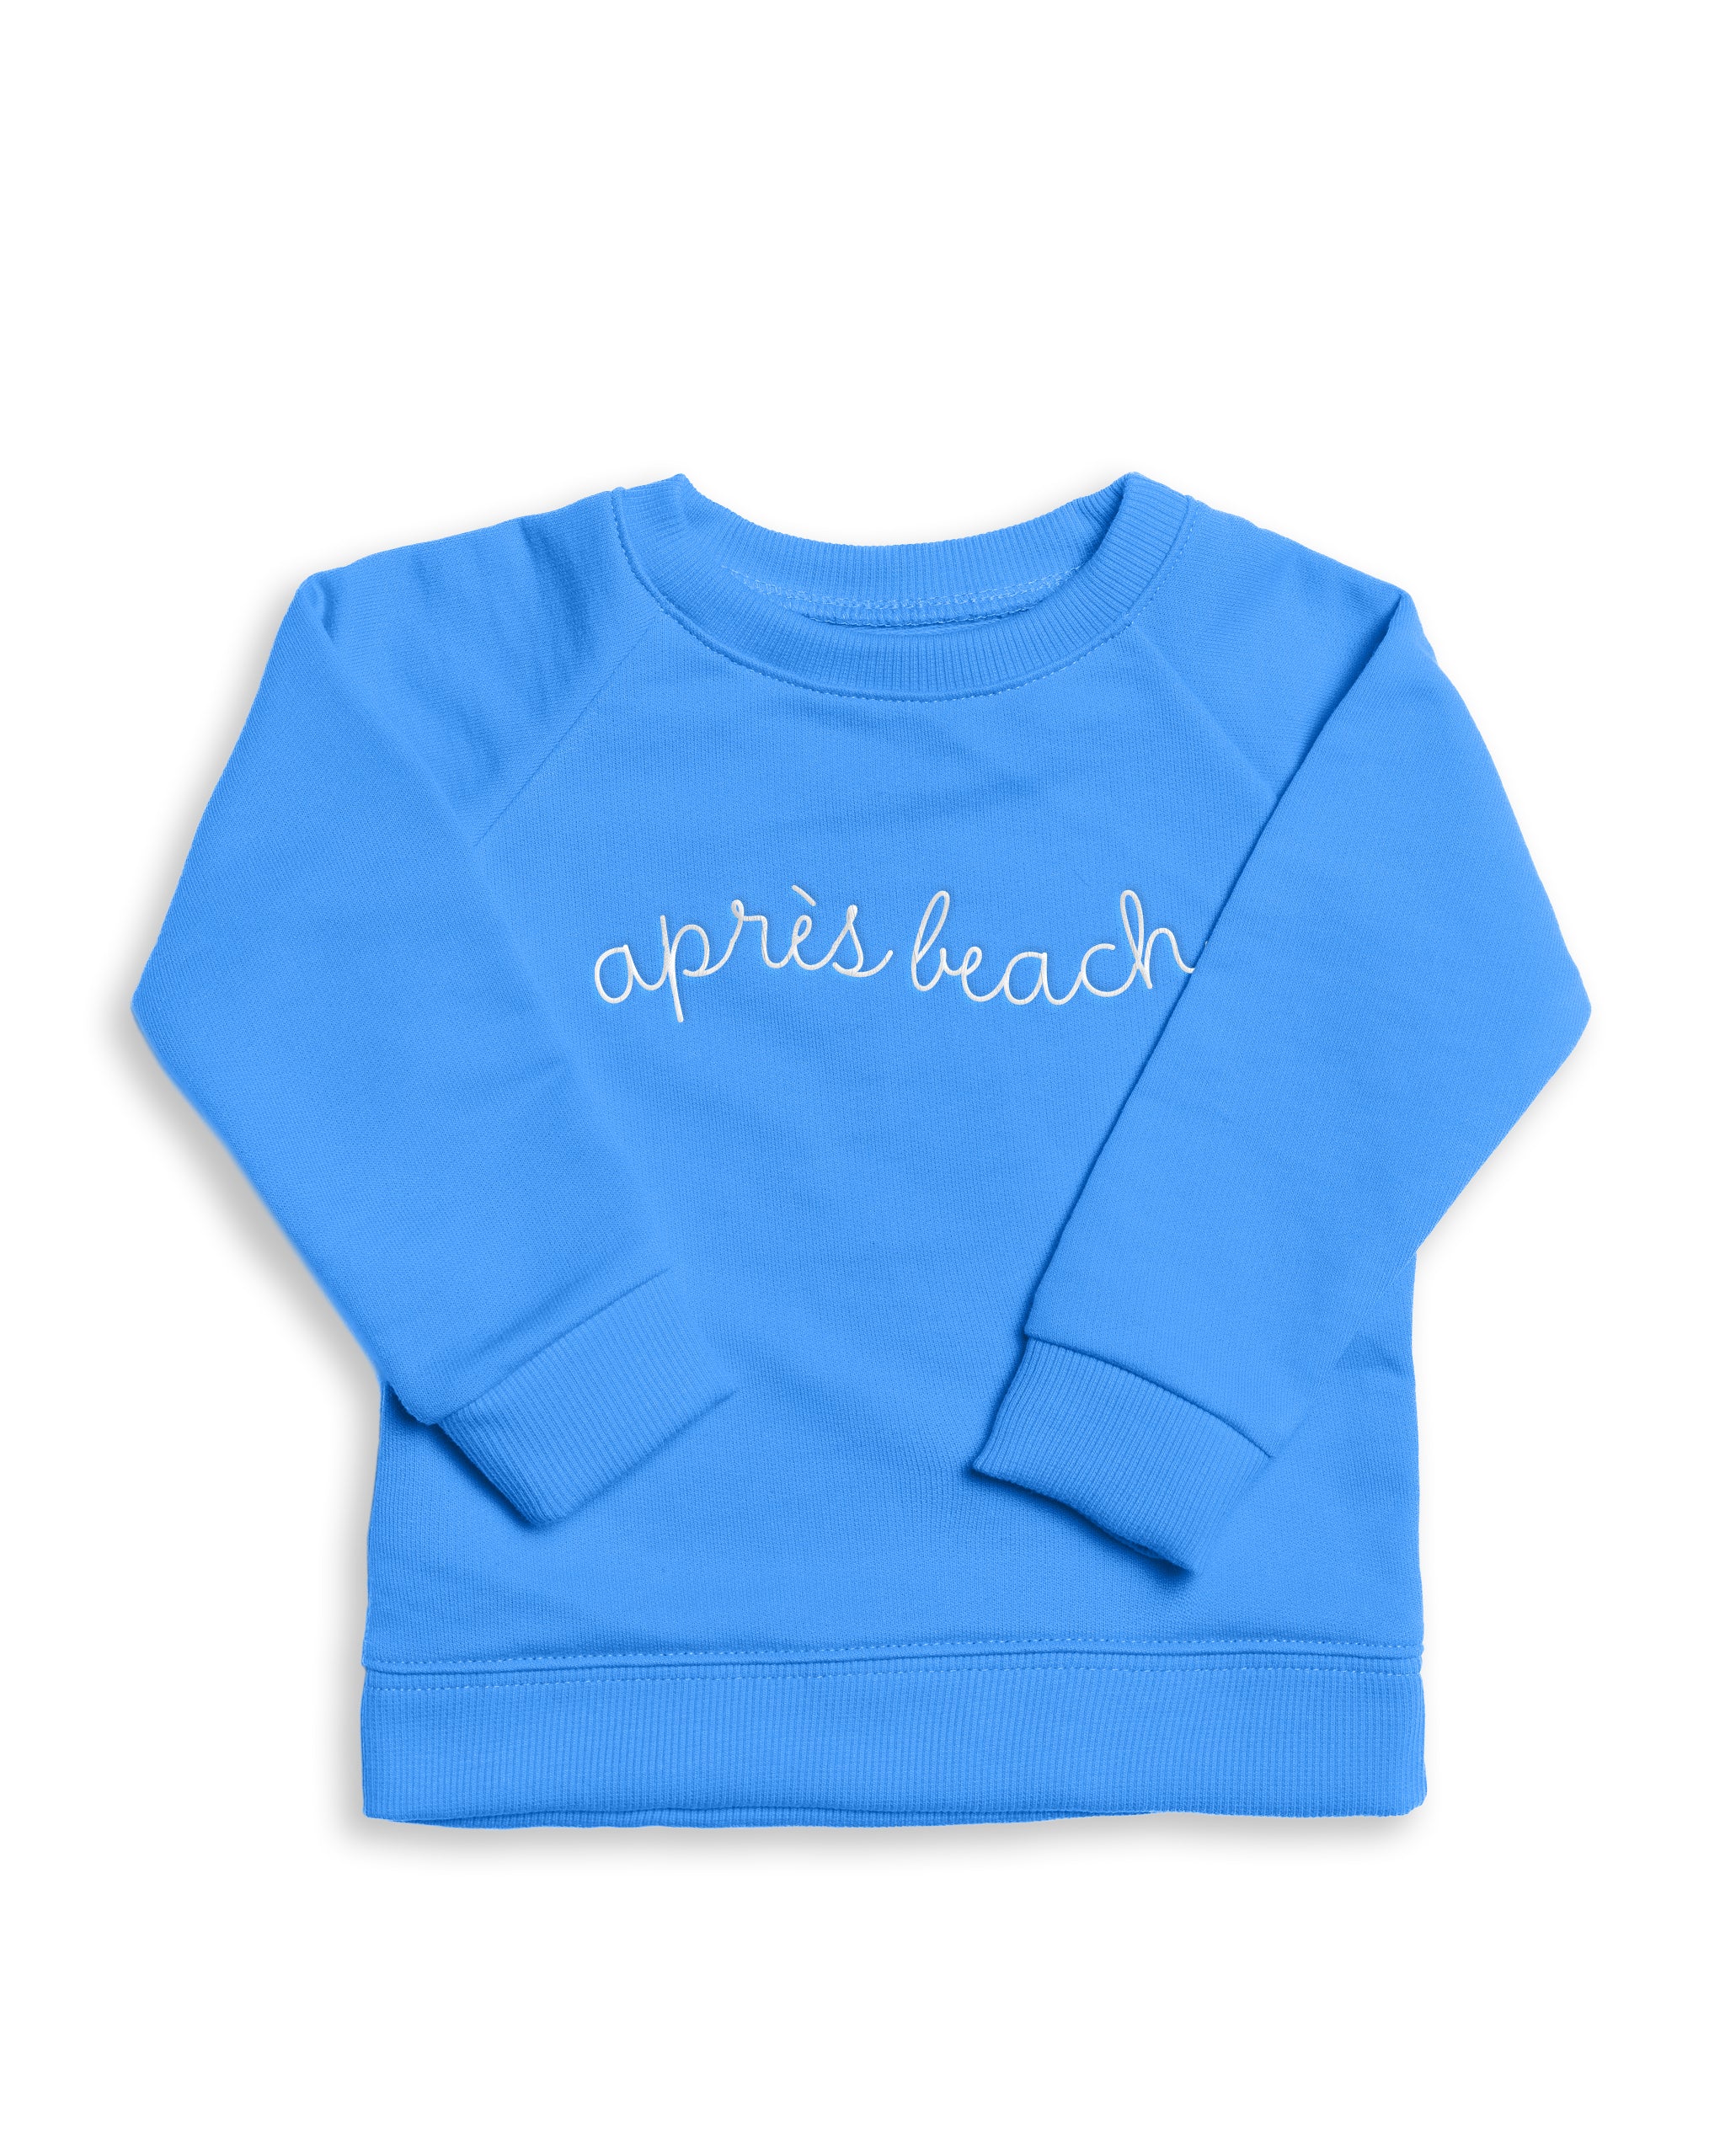 The Organic Embroidered Pullover Sweatshirt #color_Marine Blue Apres Beach